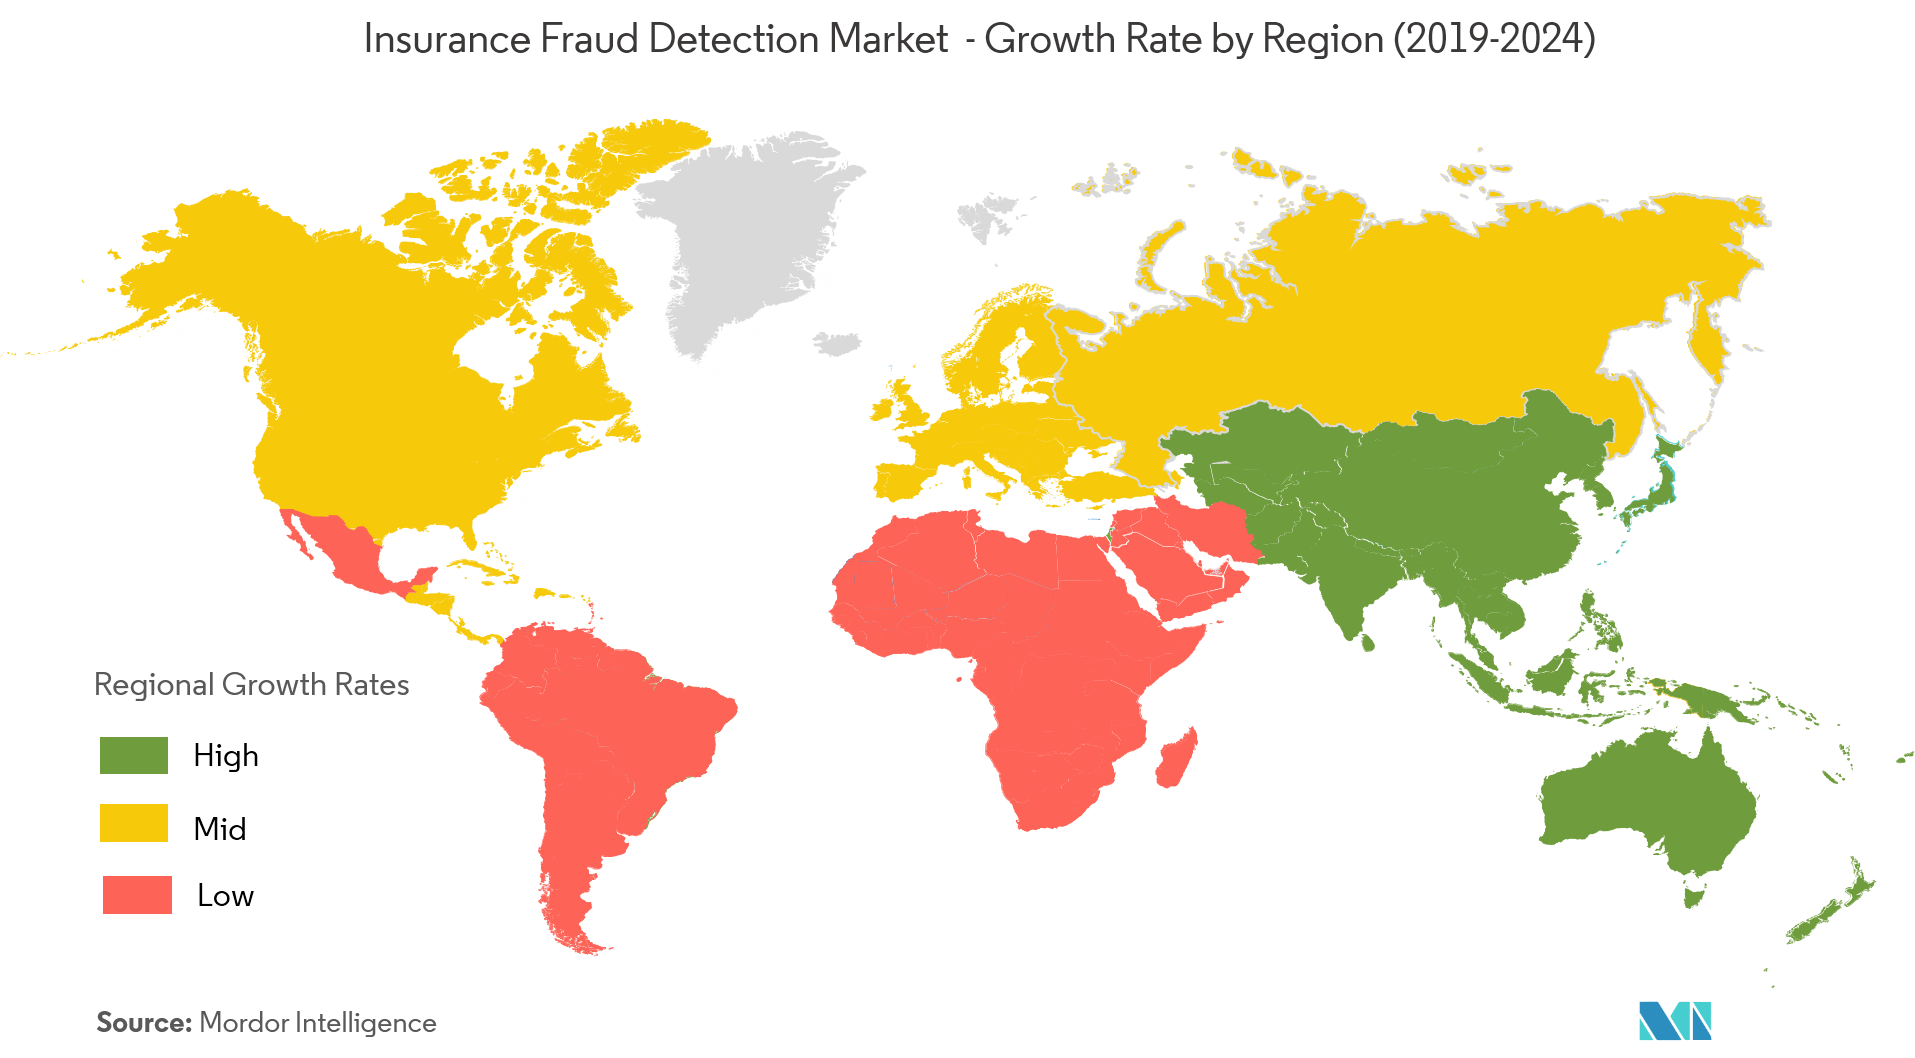 Insurance Fraud Detection Market Growth